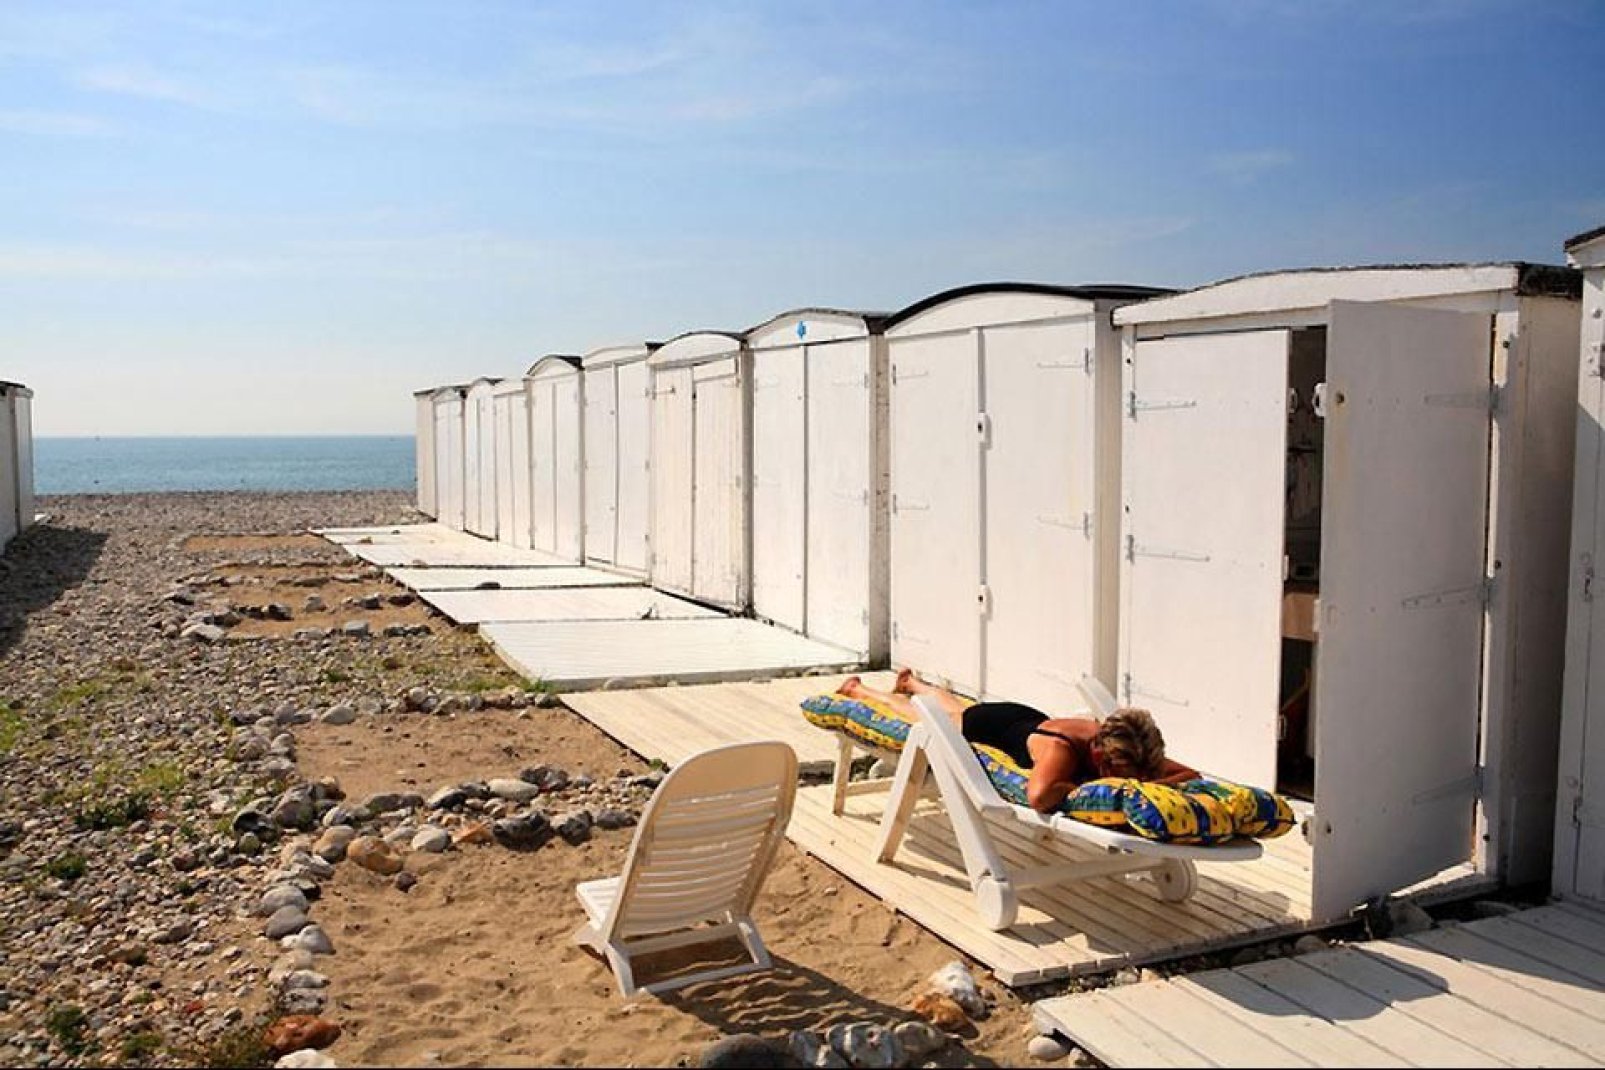 The beach cabanas of Le Havre have contributed to the city's reputation. Ever since they were created, they have inspired many painters.